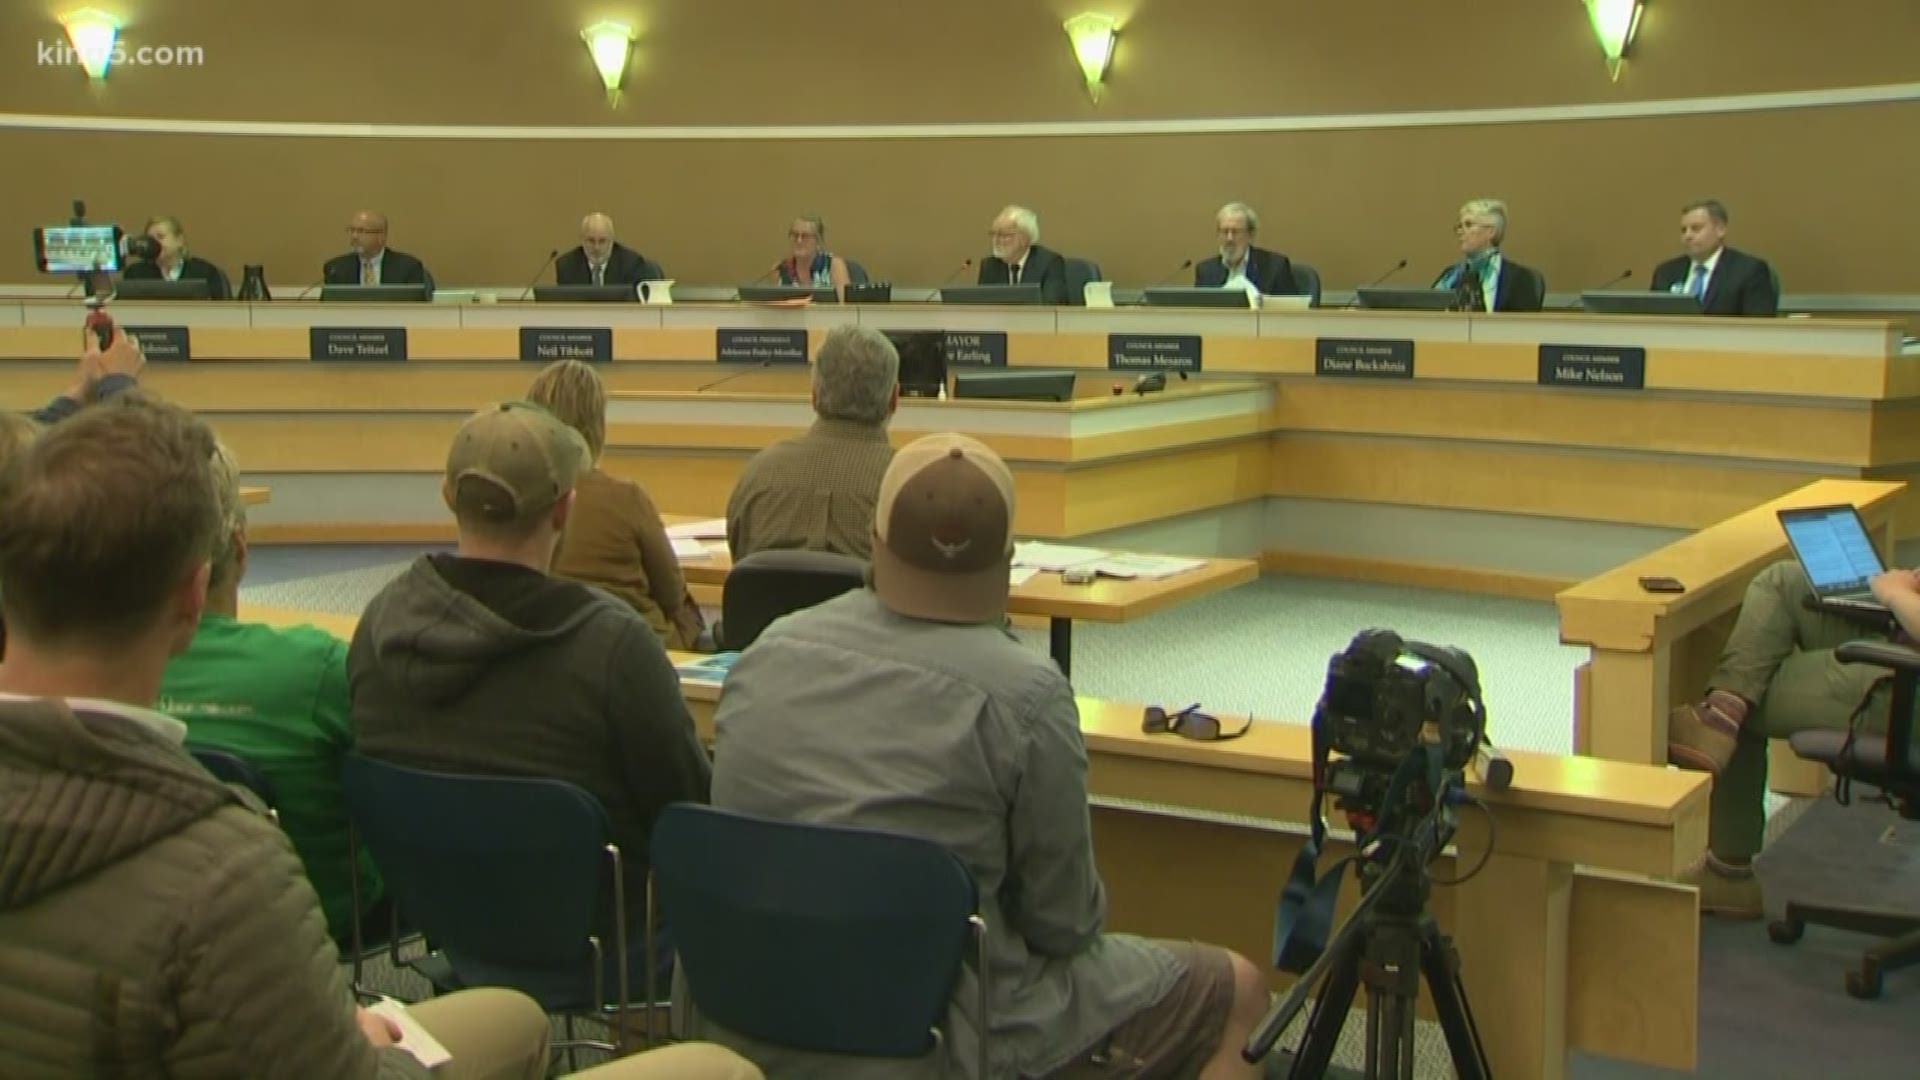 On Tuesday night, the Edmonds City Council voted 4-3 against a proposed emergency overpass for the waterfront.